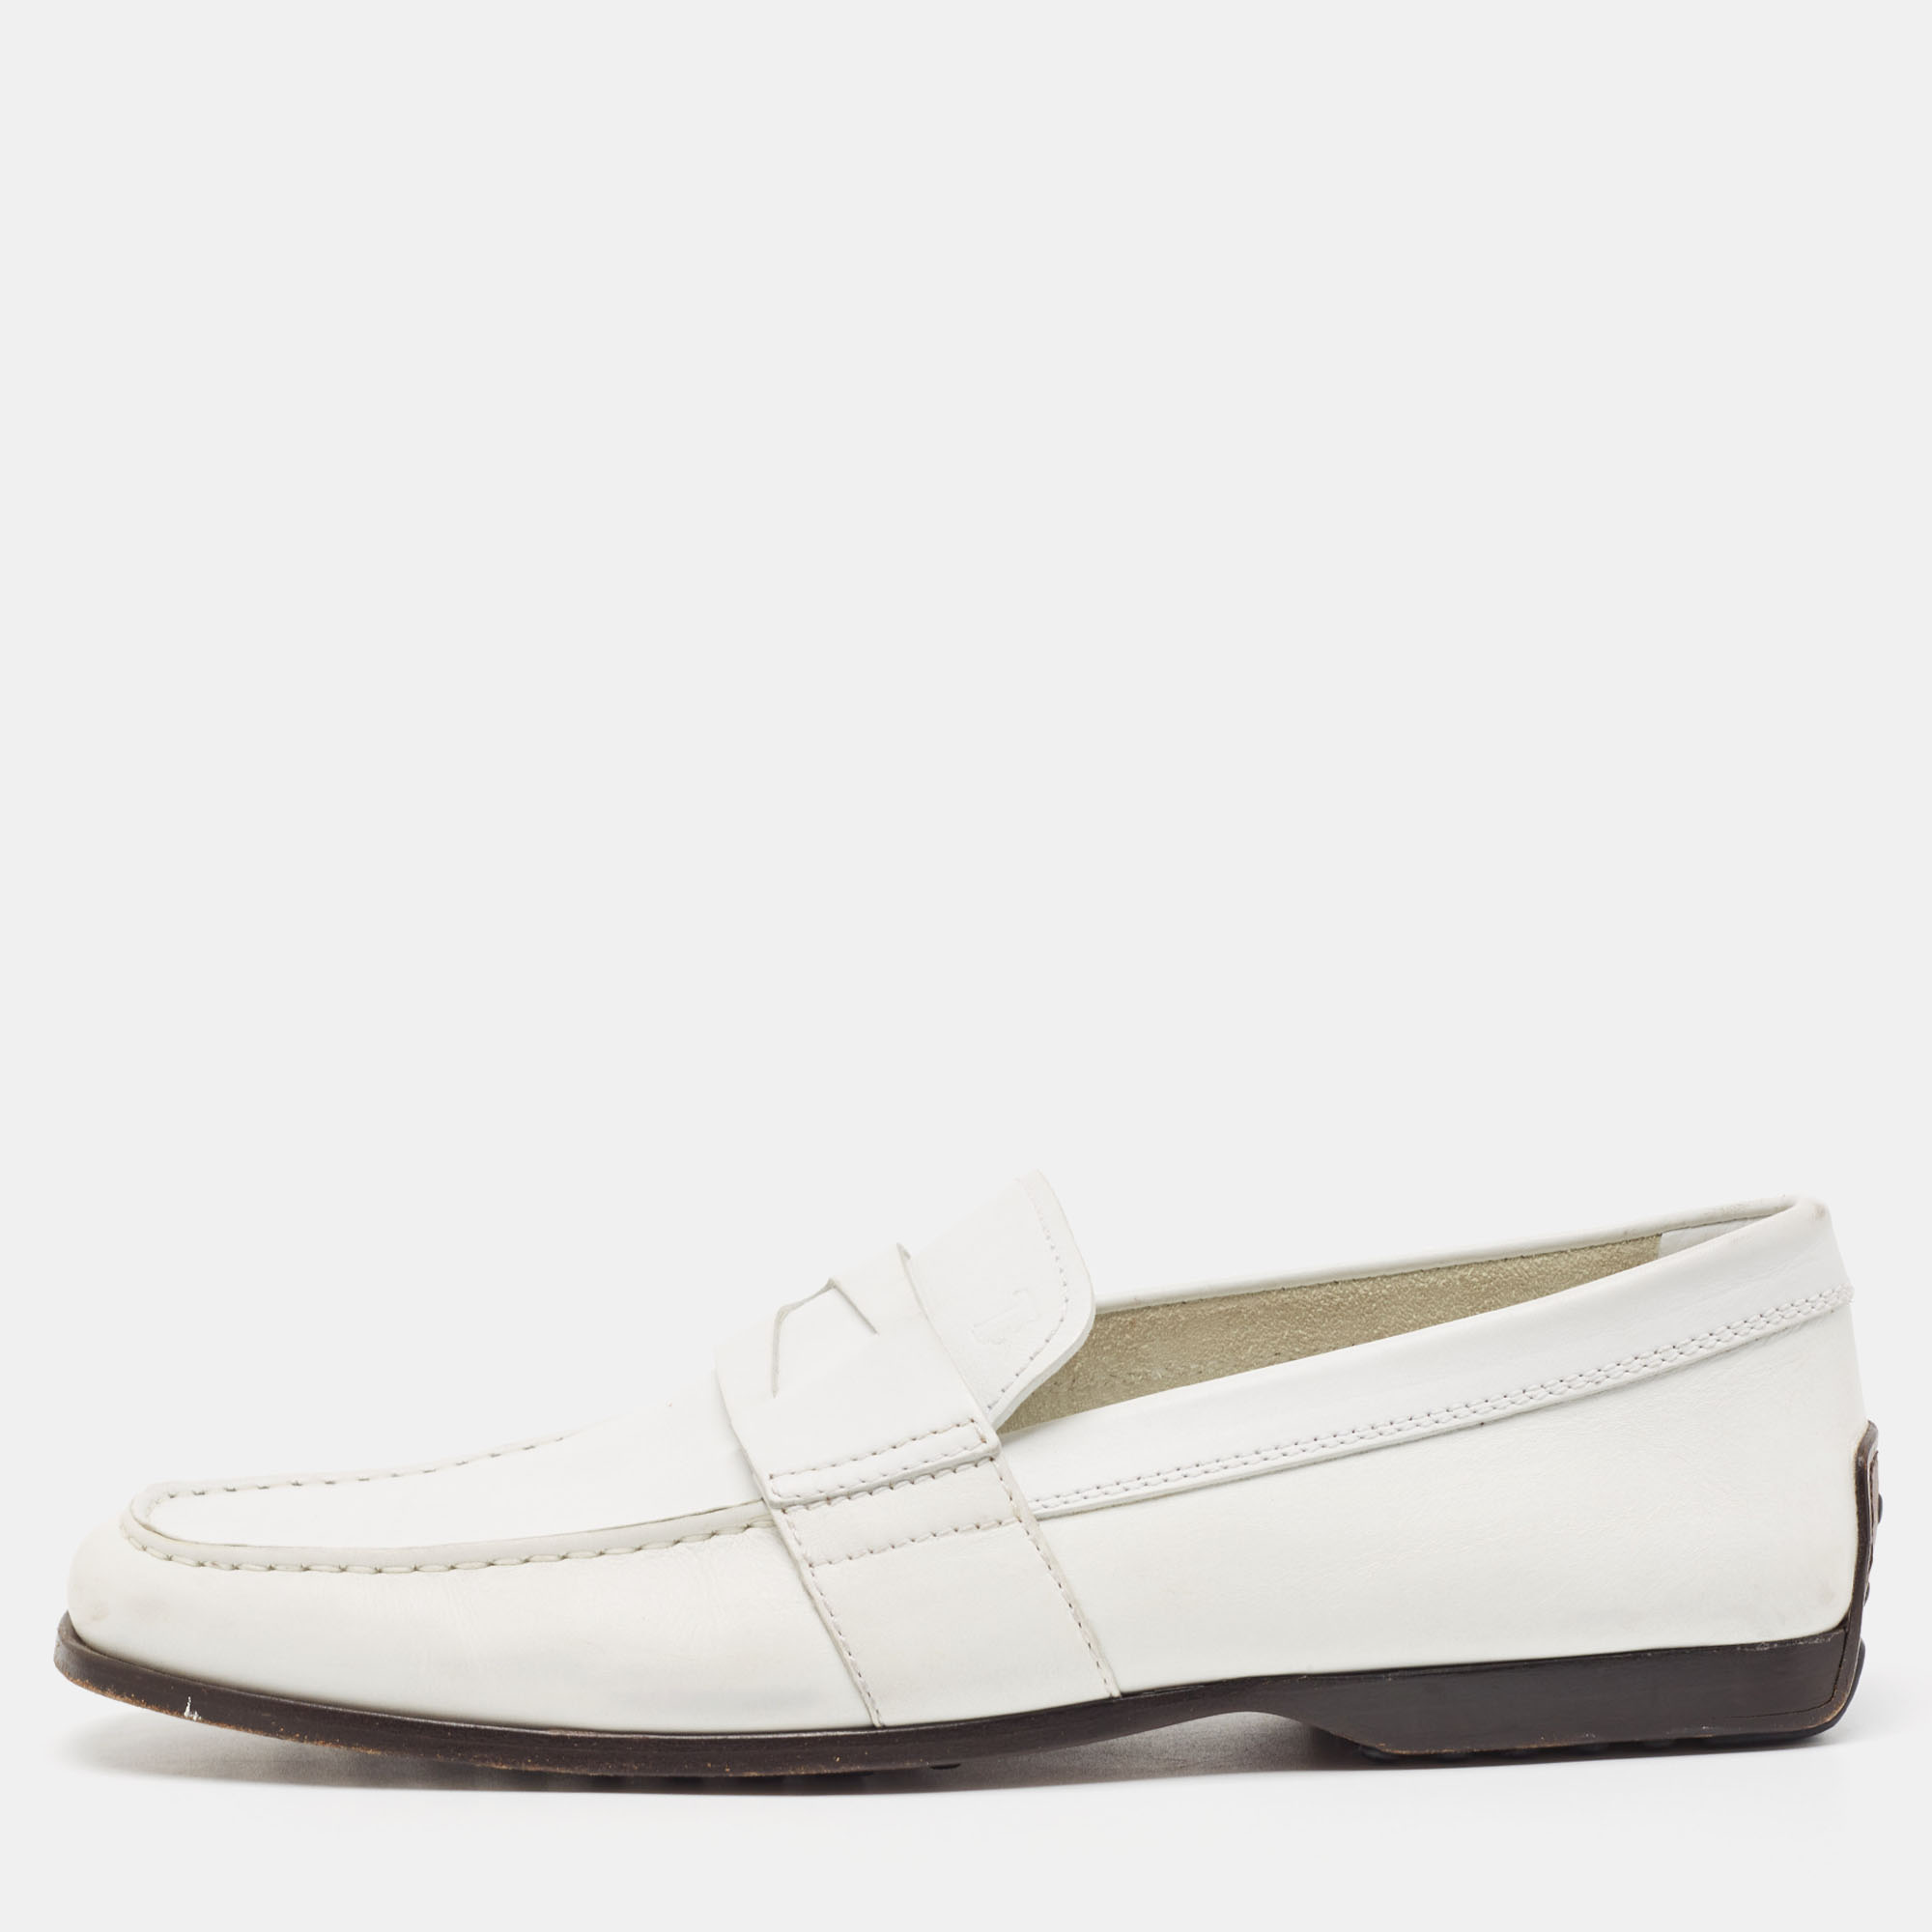 Pre-owned Tod's White Leather Slip On Loafers Size 42.5